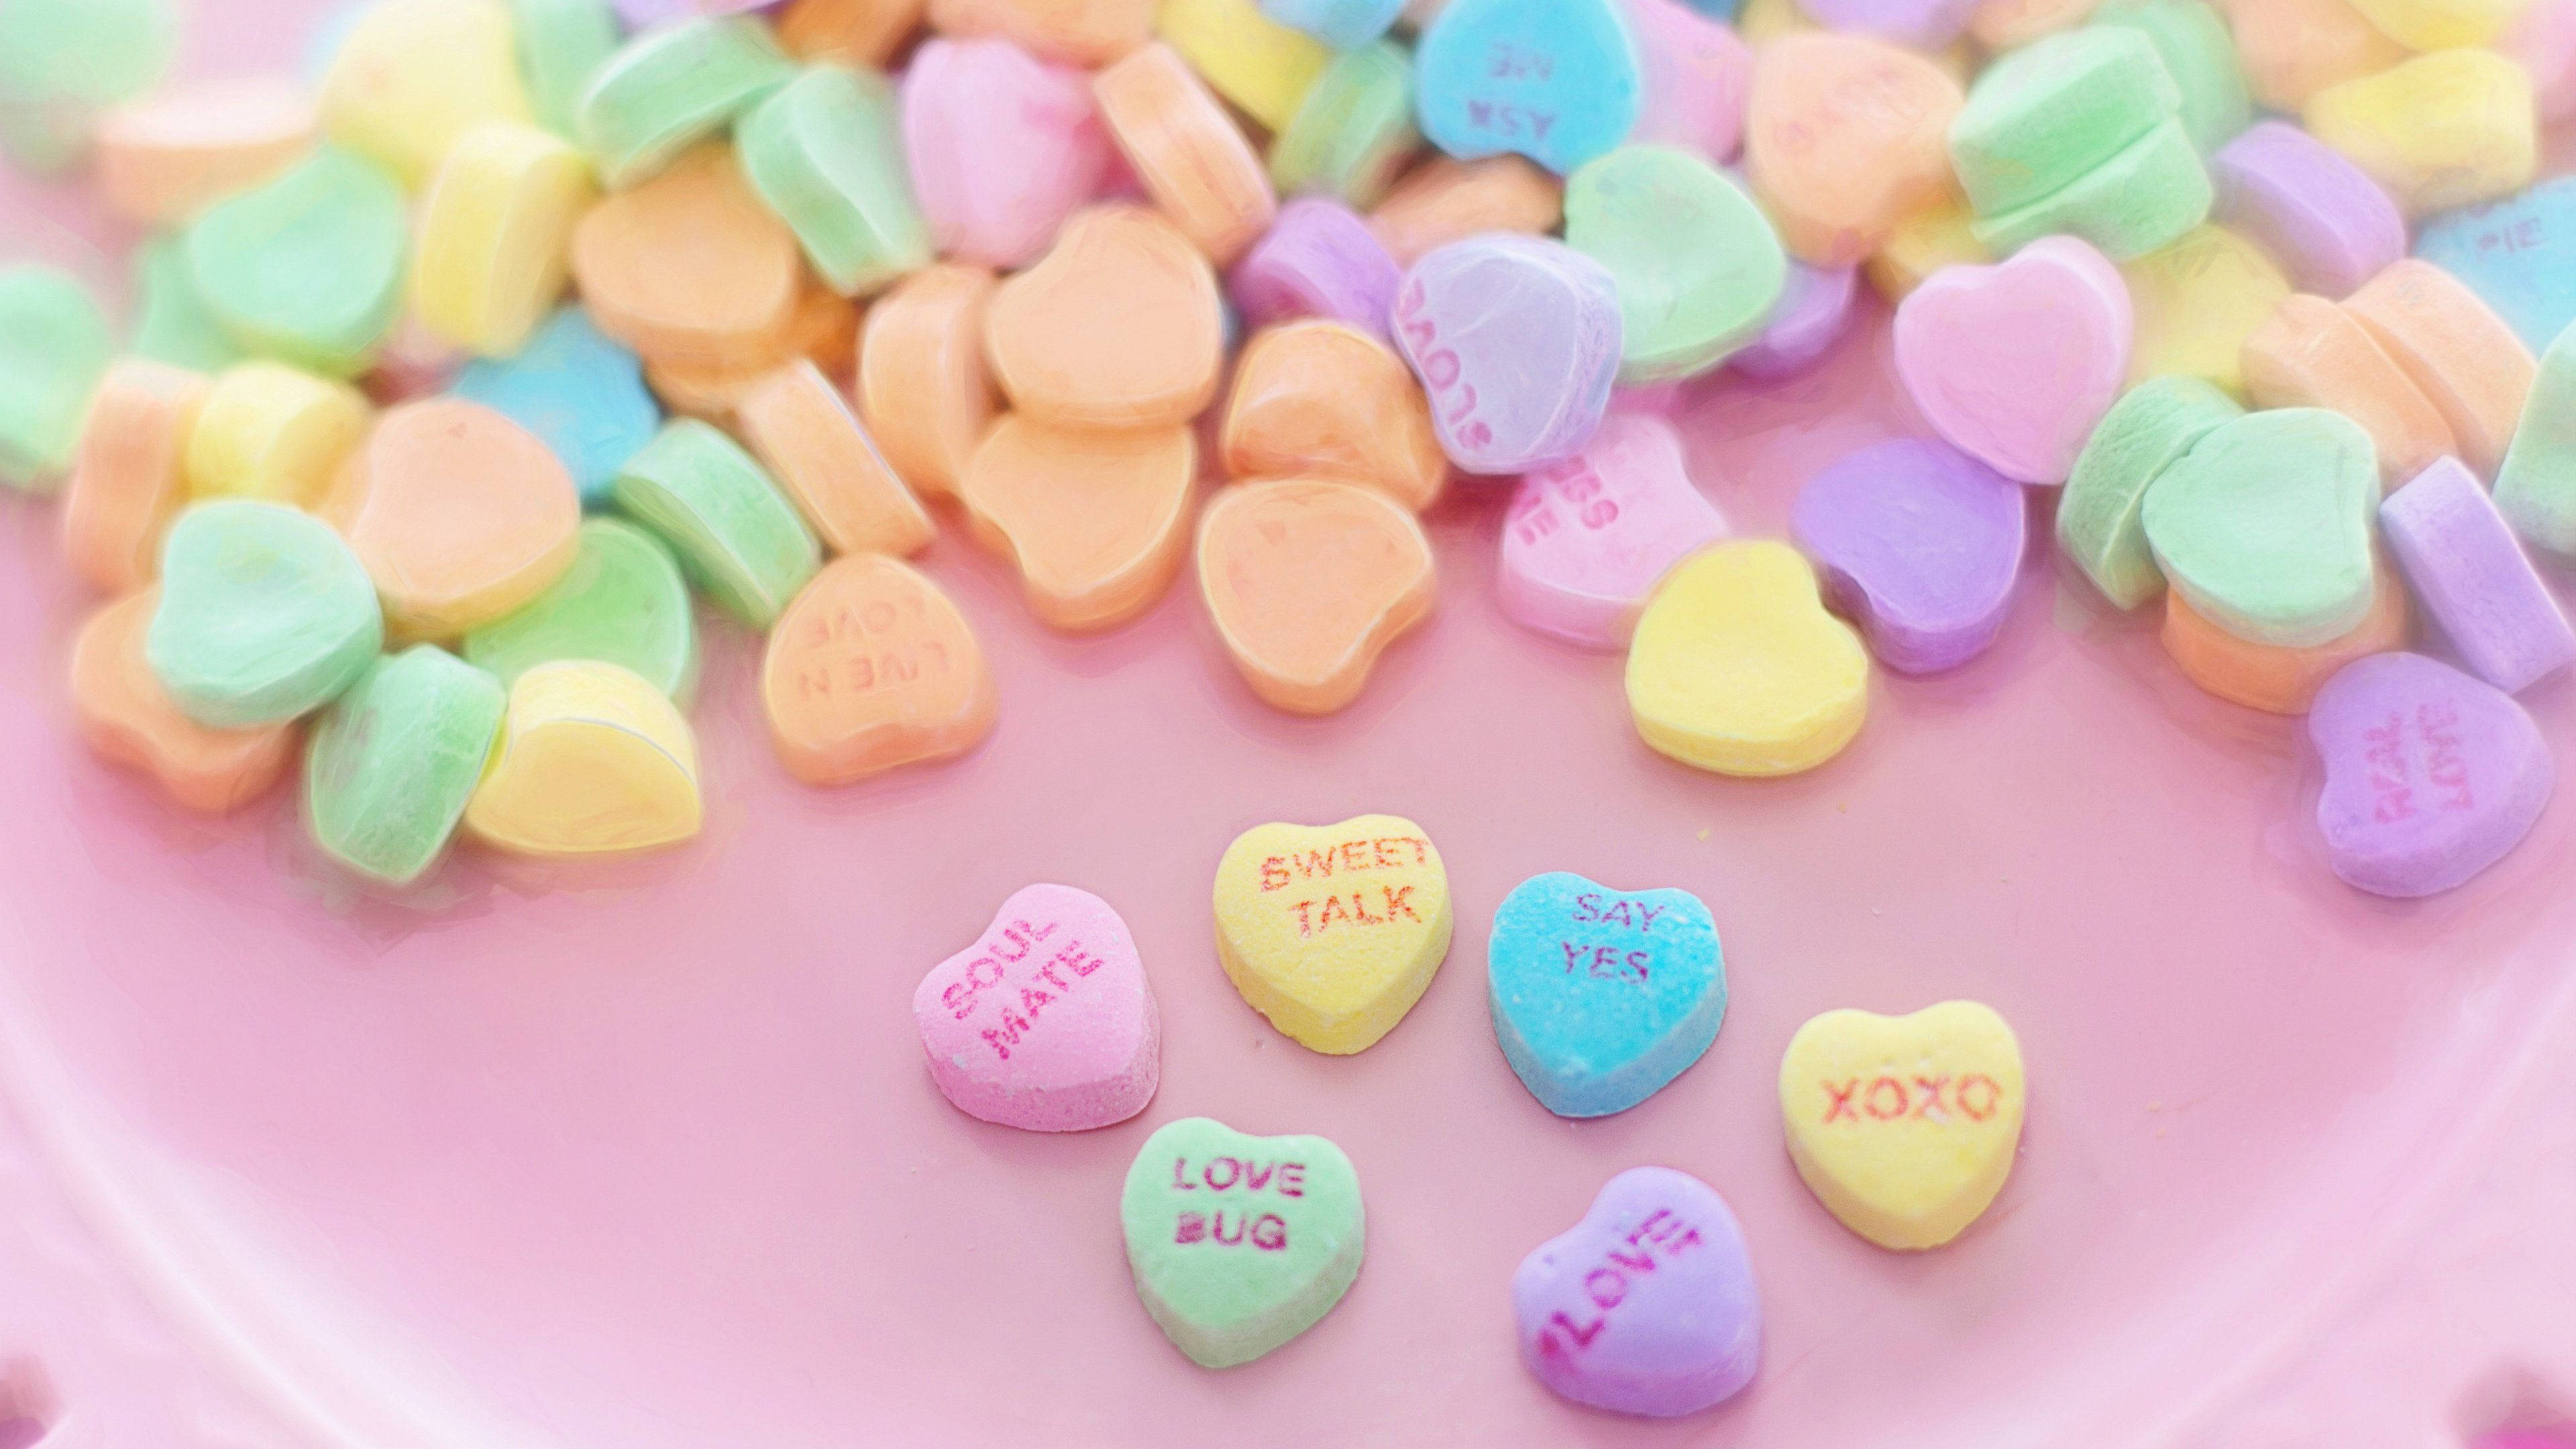 Conversation hearts on a pink background - Candy